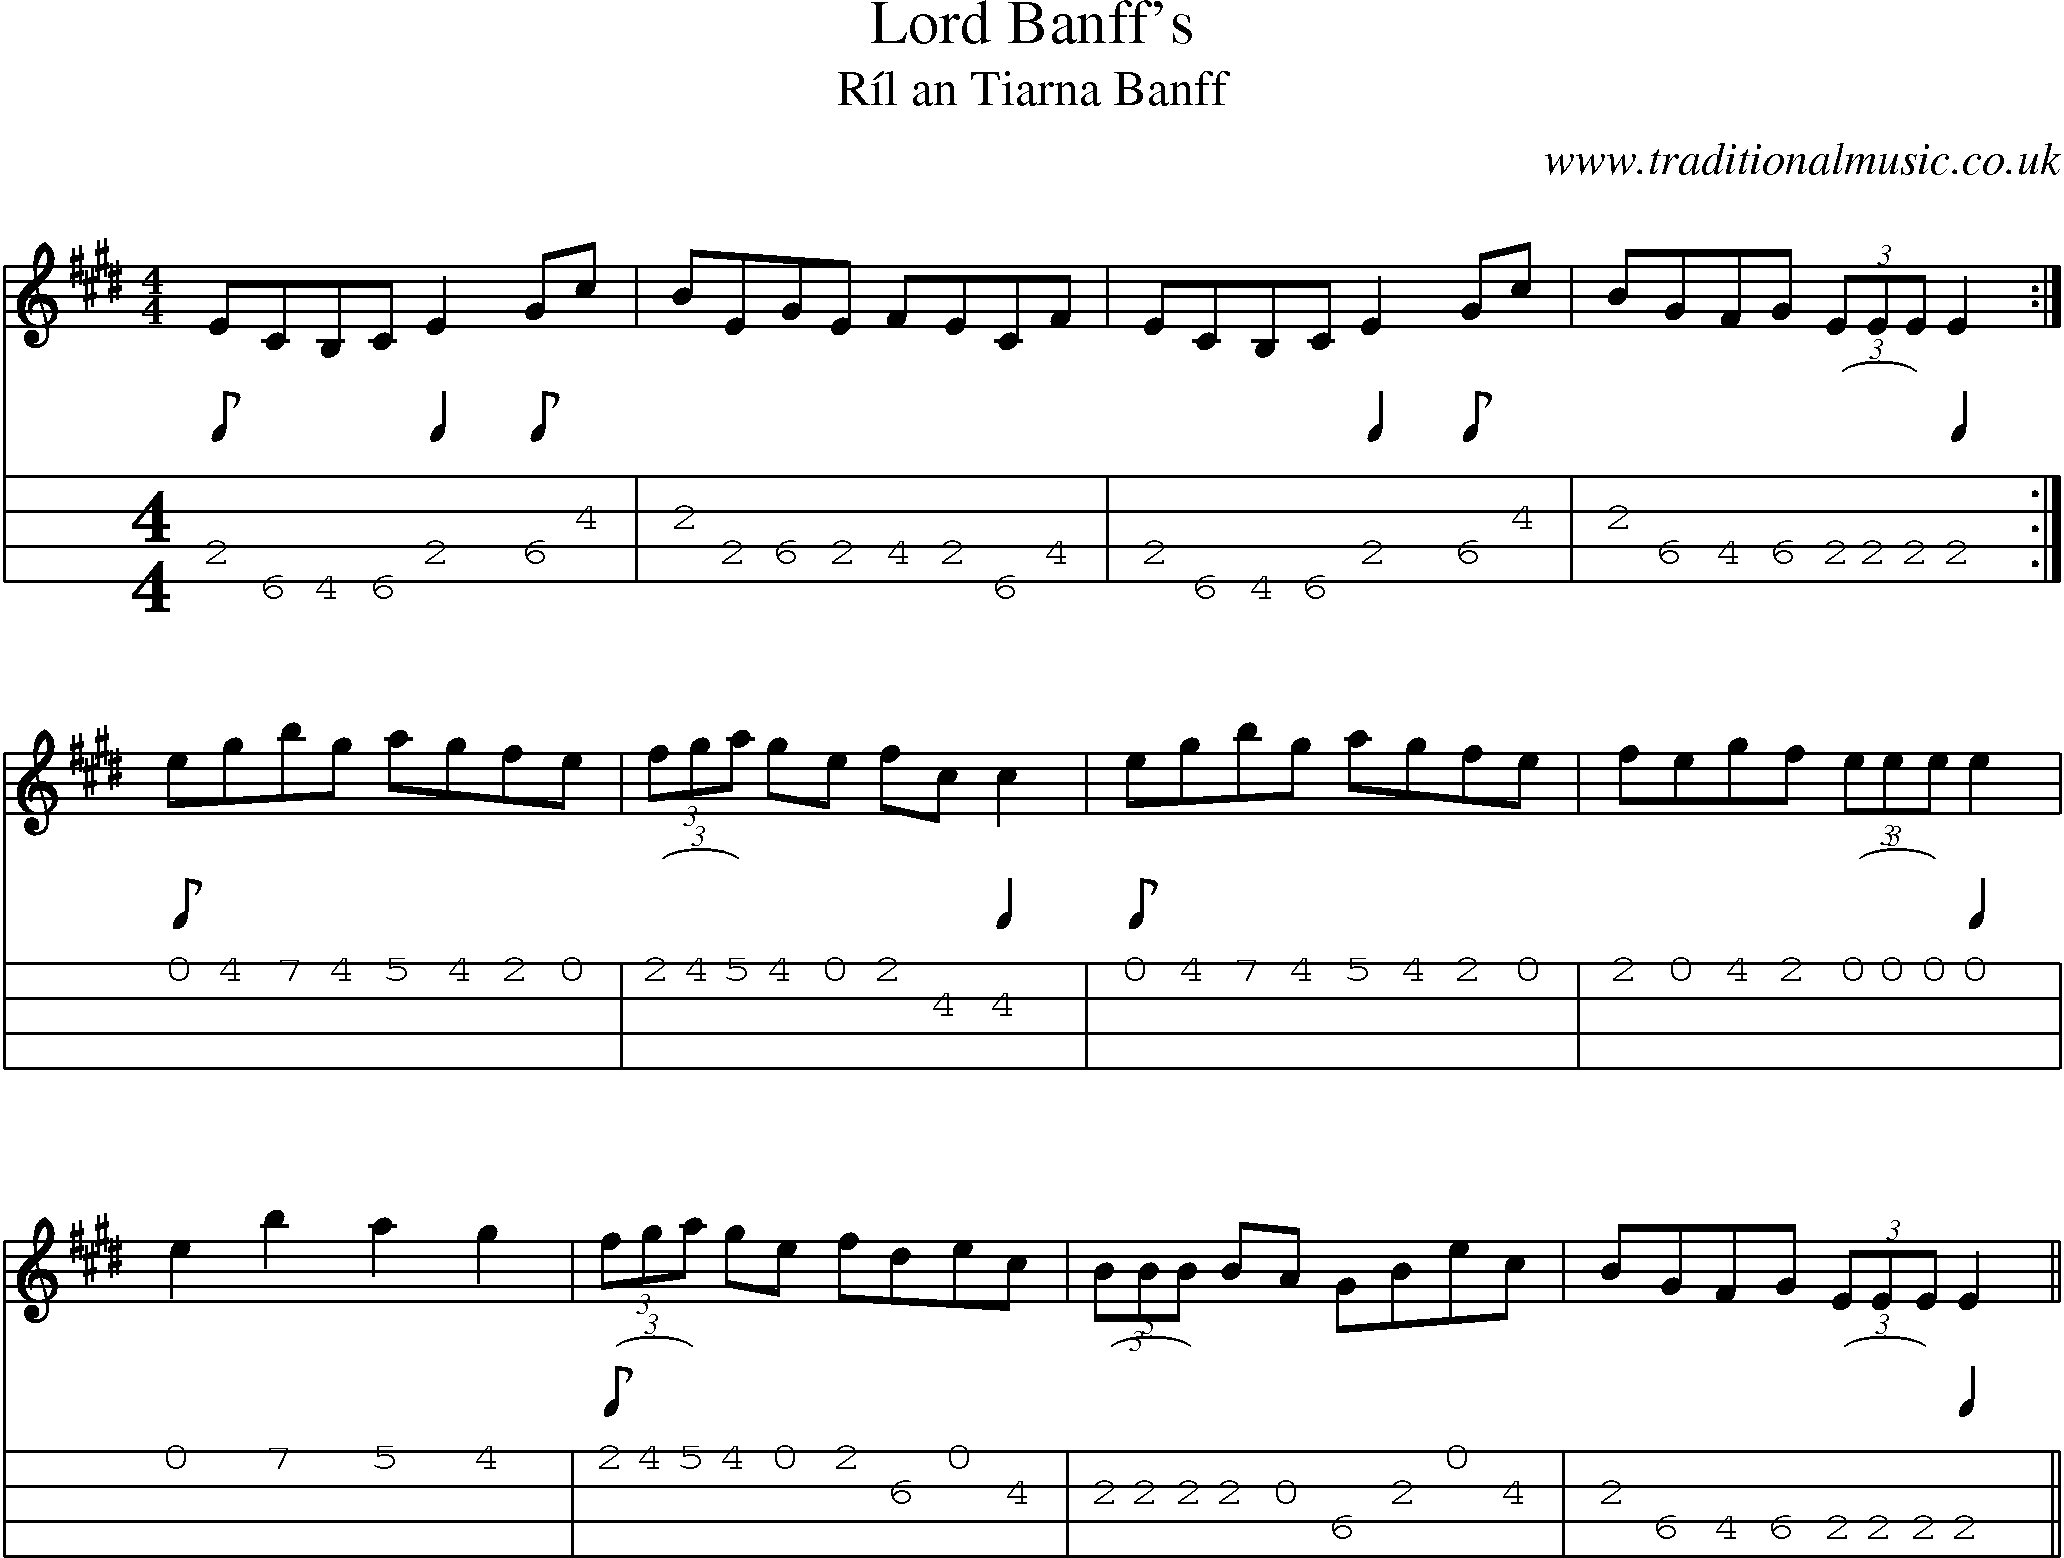 Music Score and Mandolin Tabs for Lord Banffs